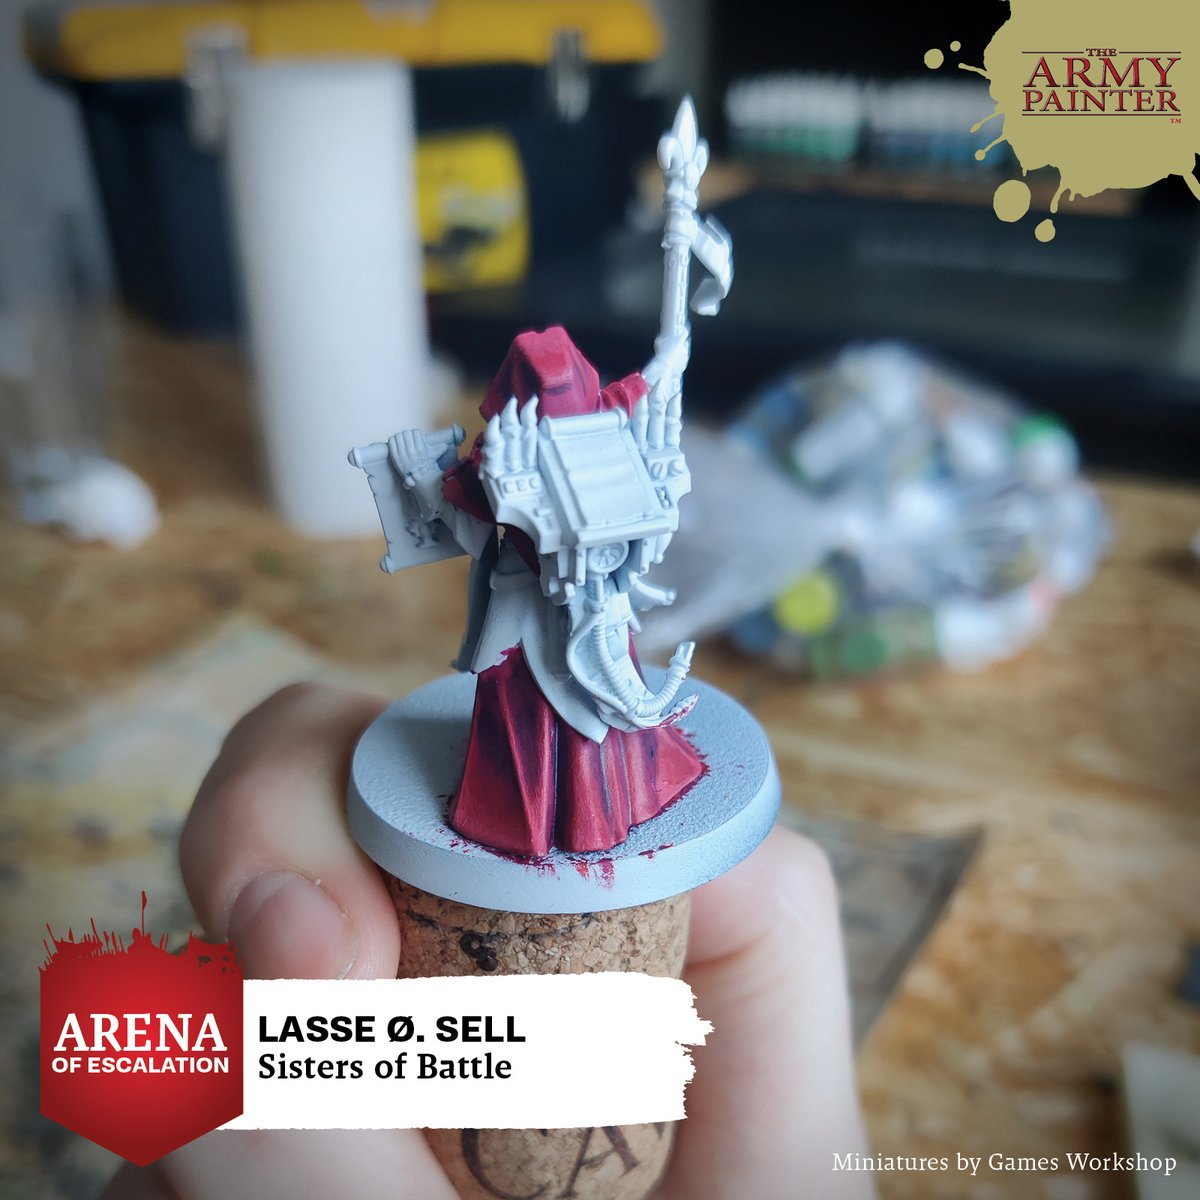 The Arena of Escalation continues with Lasse's Adepta Sororitas. Having heard the call of the two pronged approach of Speedpaint & Warpaints Fanatic, his Dialogus can't help but spread the good news! Be sure to check out our blog for future updates 👉 thearmypainter.pulse.ly/pvvxu4brmk